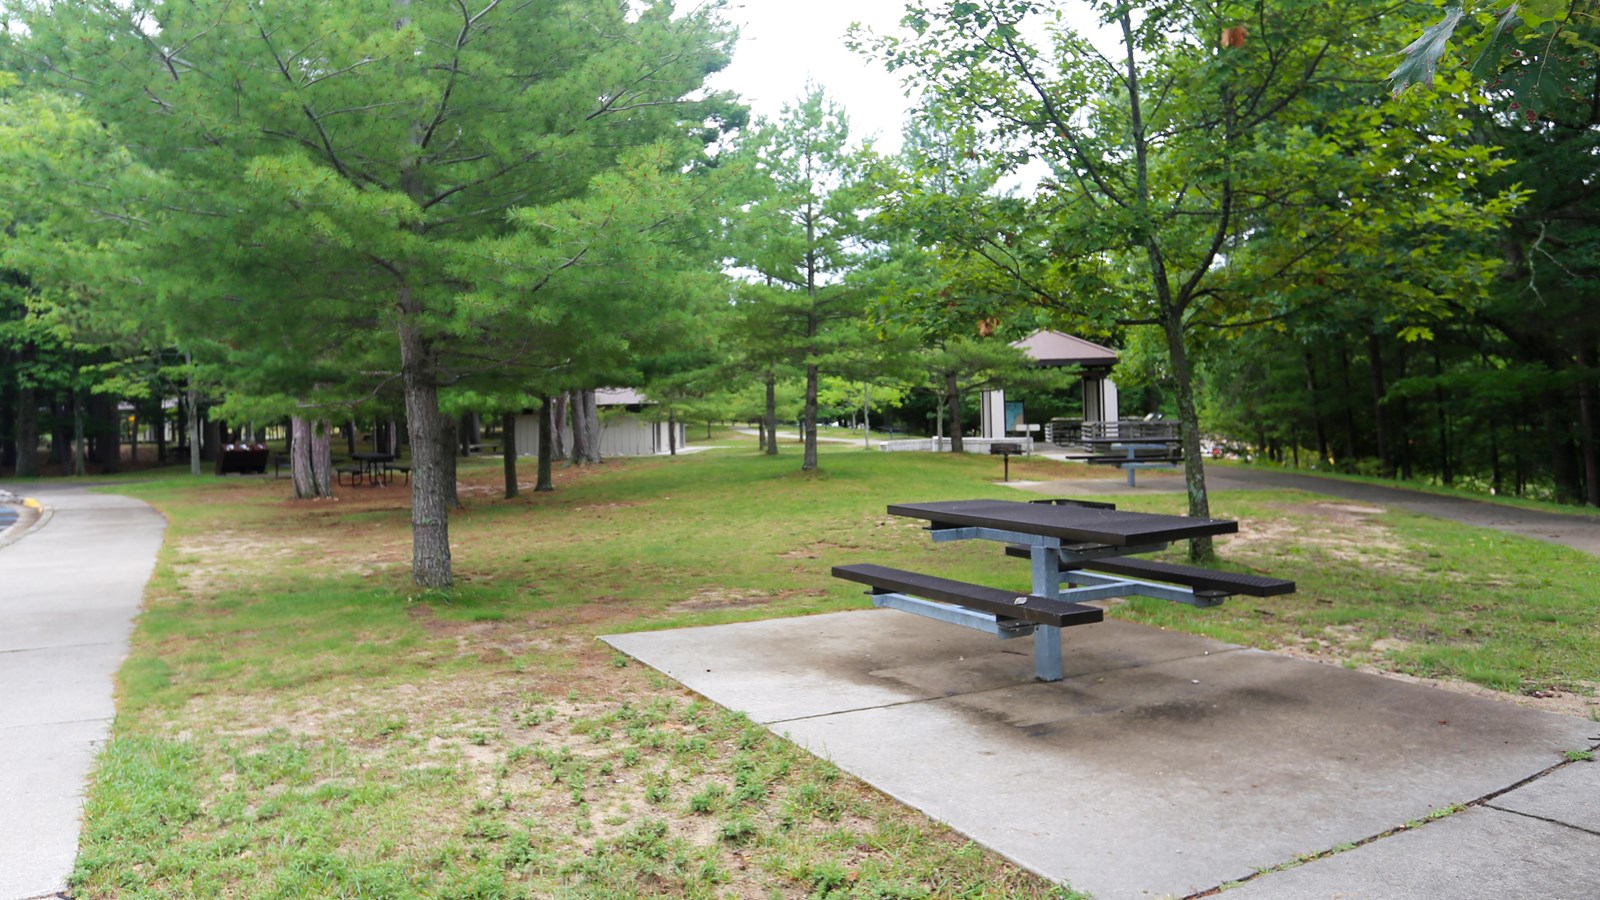 Metal picnic table on a concrete pad sits in grassy area surrounded by concrete sidewalk.